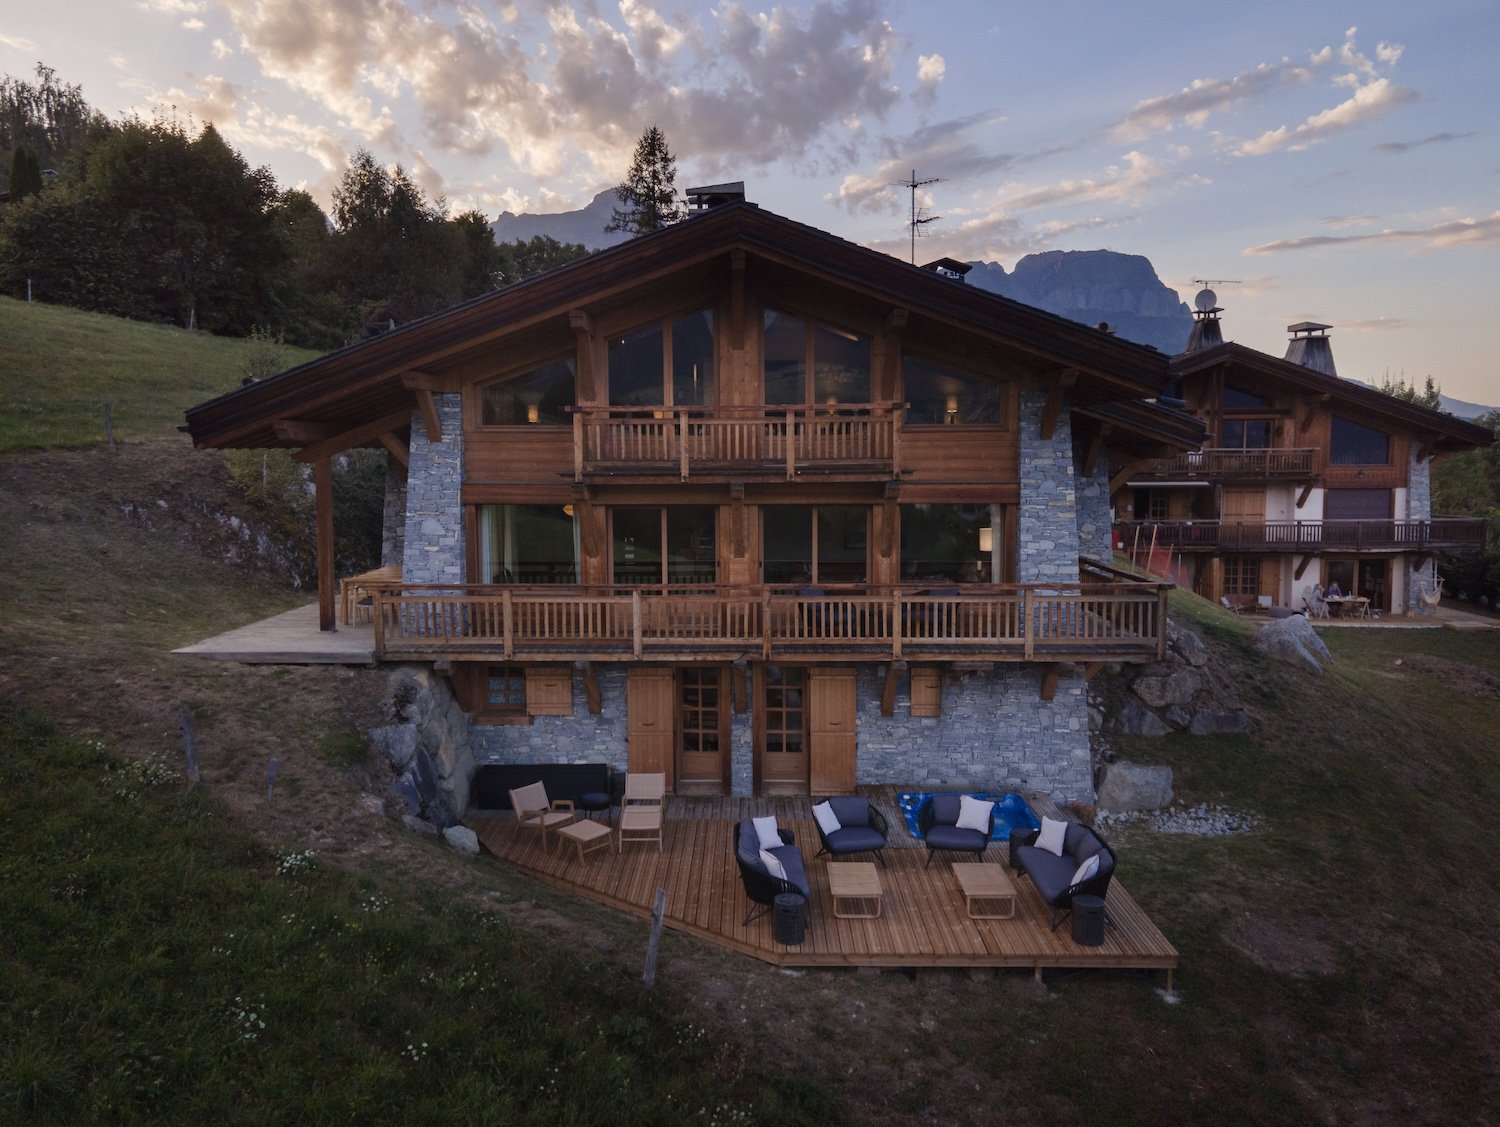 Francis+York+Discover This Luxury Chalet in the French Alps From The August Premium Collection 00002.jpg